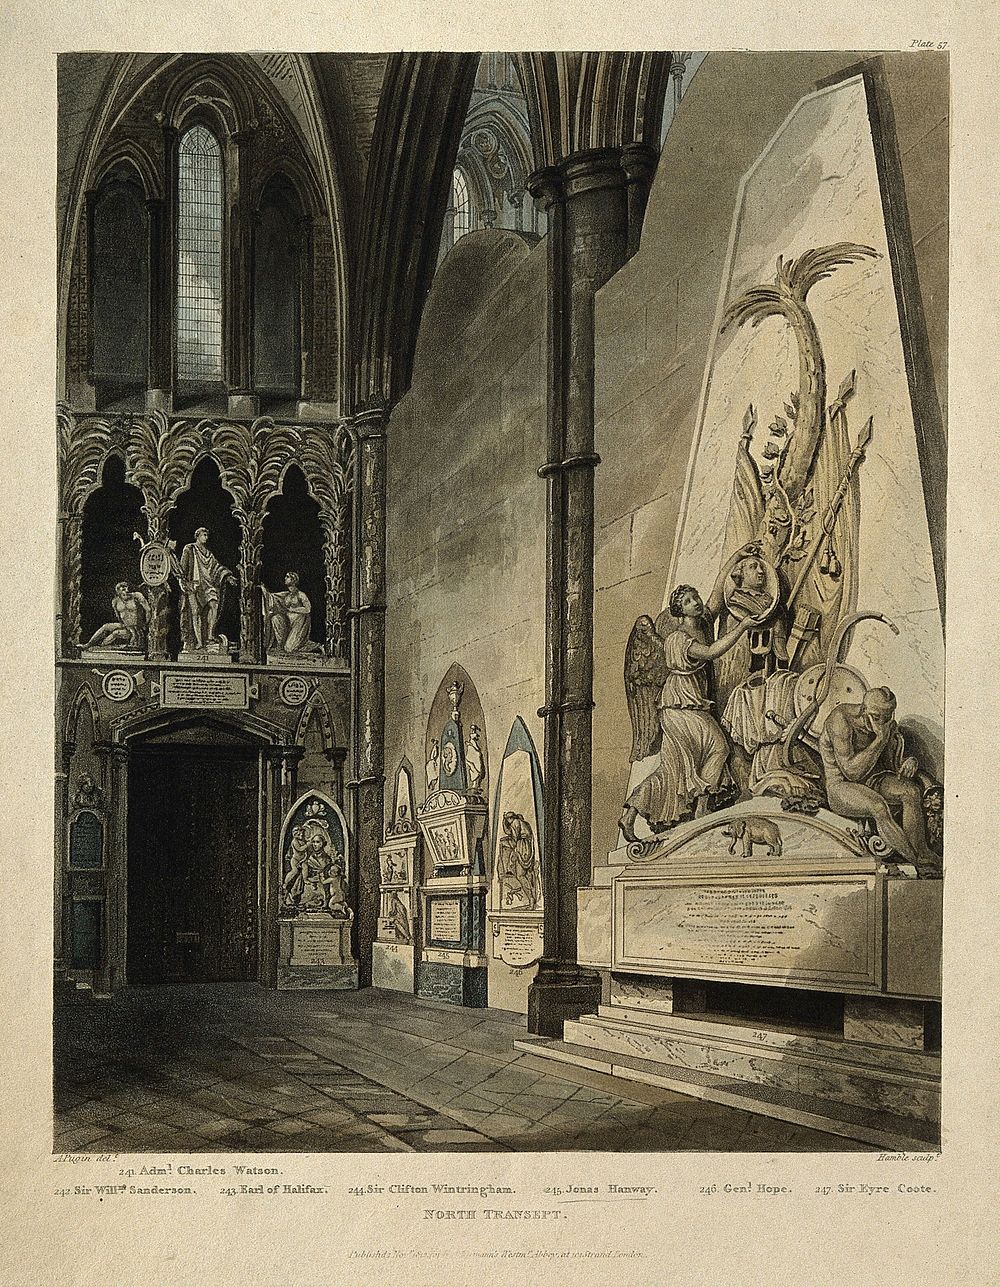 Monuments to Jonas Hanway and others in Westminster Abbey. Coloured aquatint by J. Hamble, 1812, after A. Pugin.